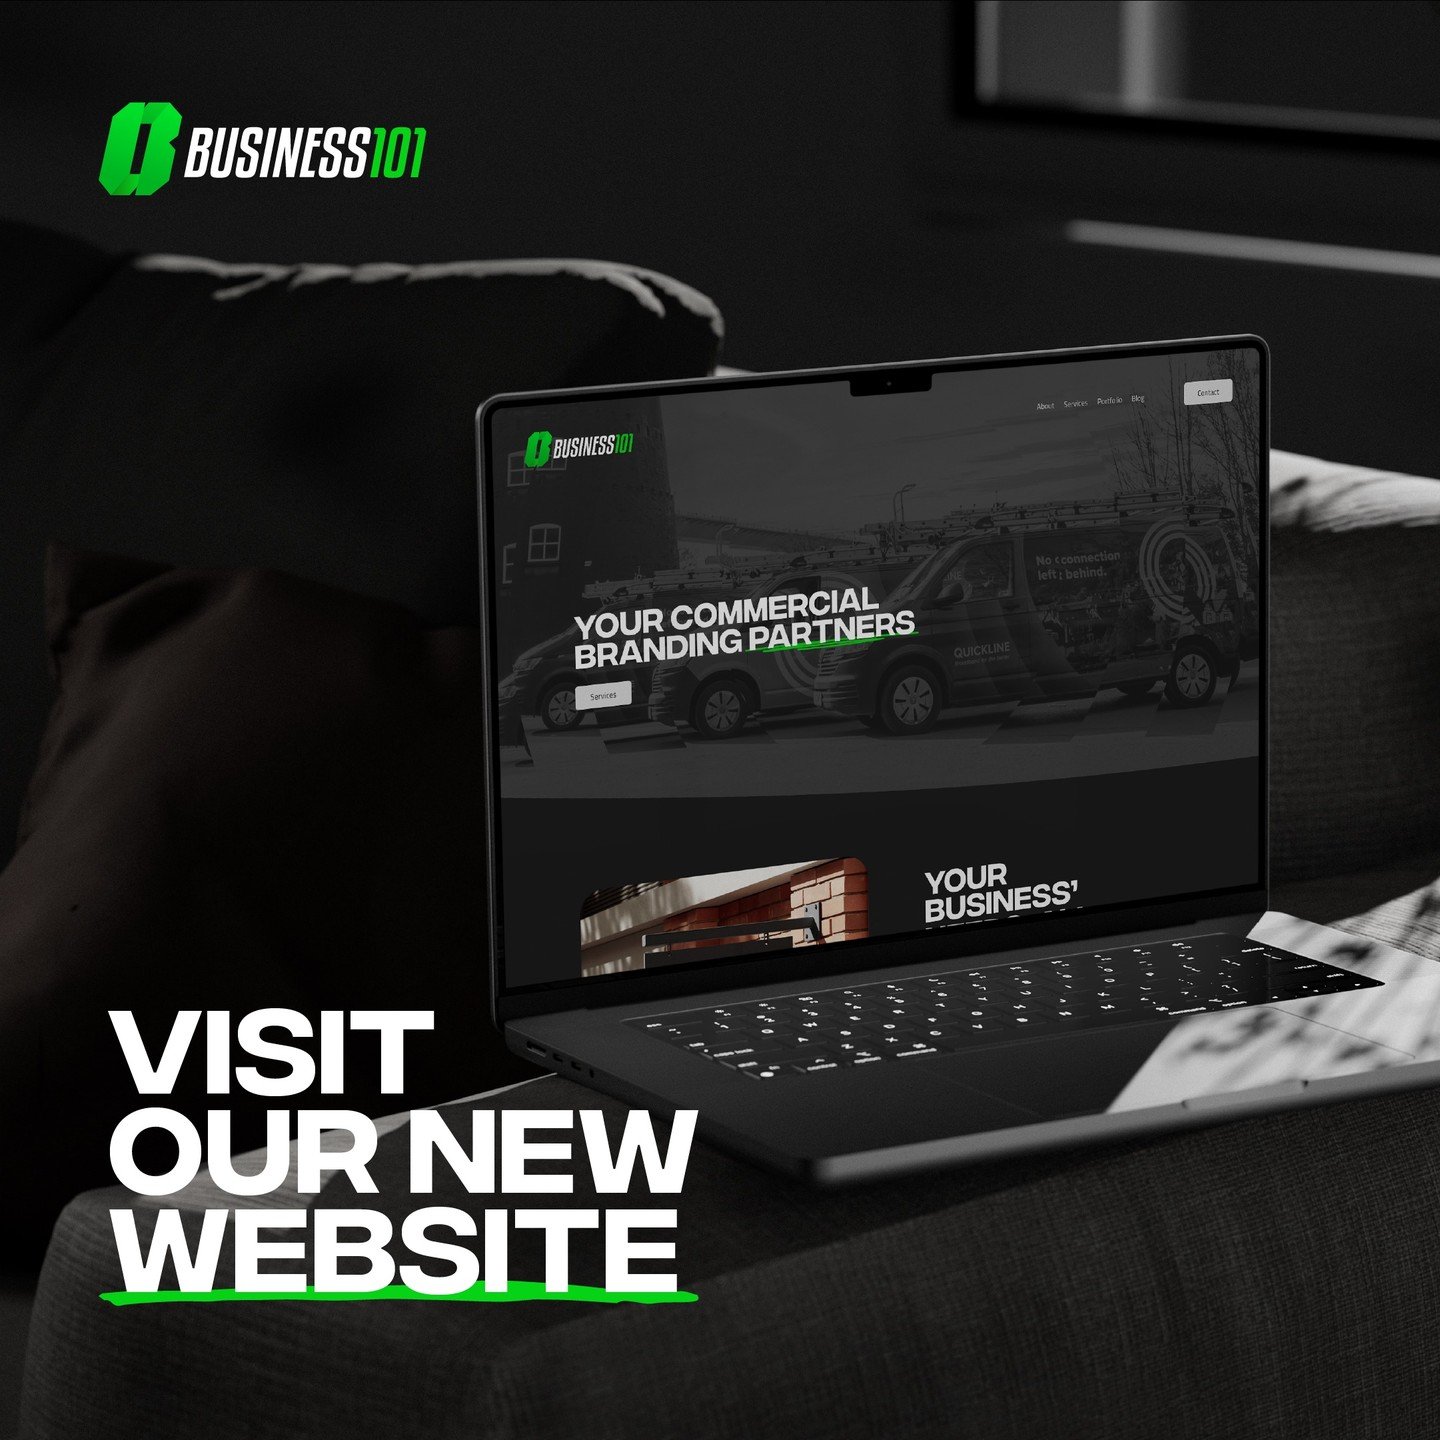 We&rsquo;re pleased to announce the introduction of our BRAND NEW WEBSITE!! 🎉
 
Take a look at it today; you can find out more about our wide range of commercial branding services, from bespoke vehicle livery and signage solutions, right through to 